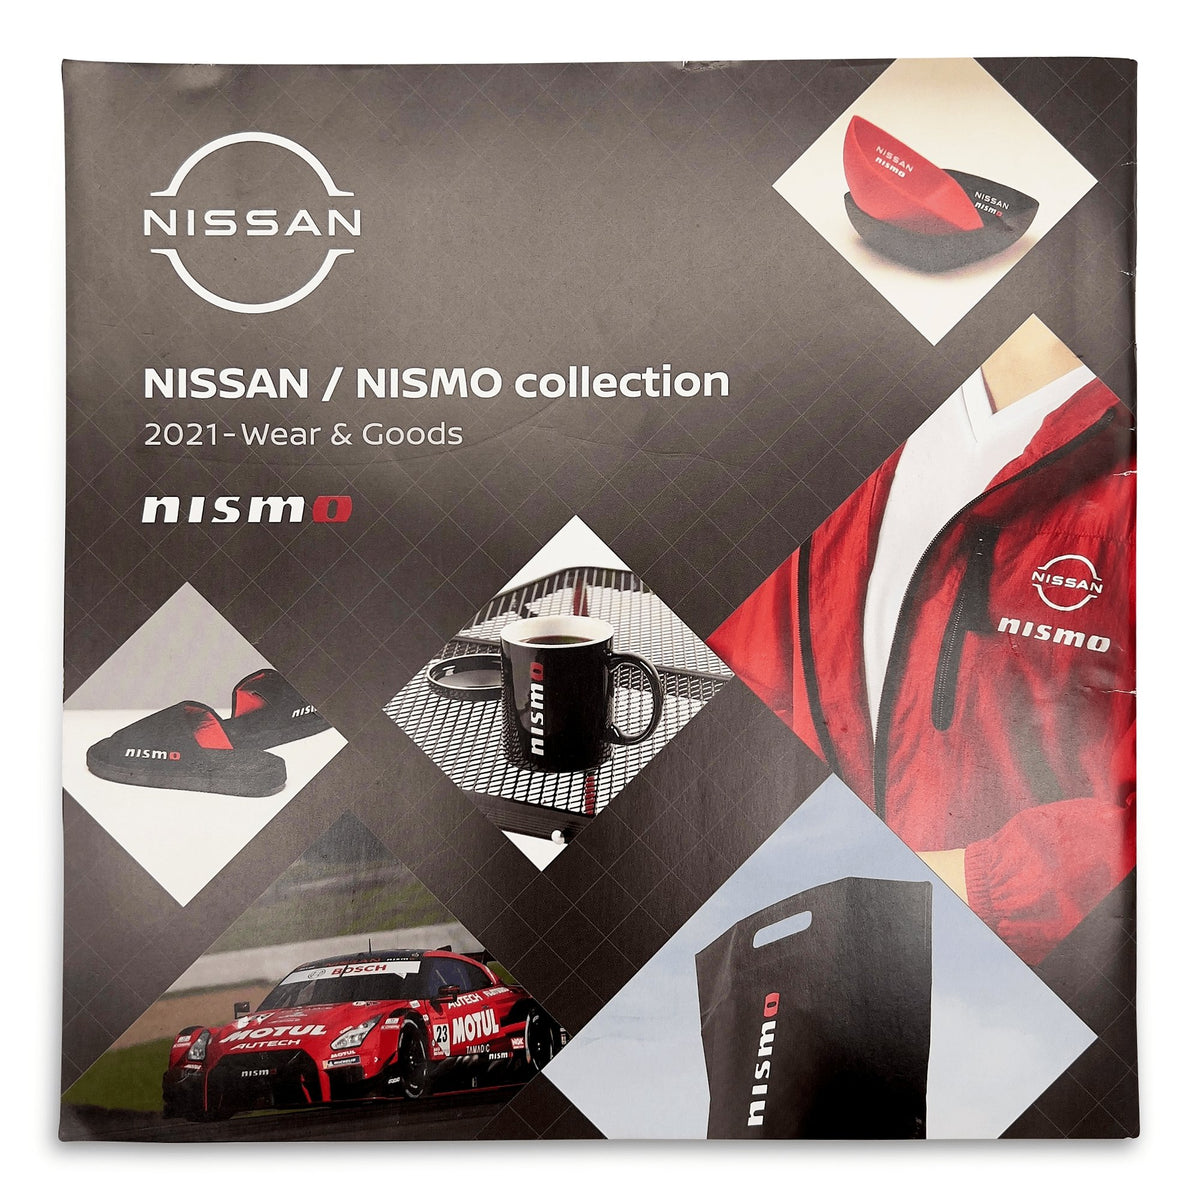 New Nissan JDM Nismo Japan Collection Wears And Goods Catalog - Sugoi JDM